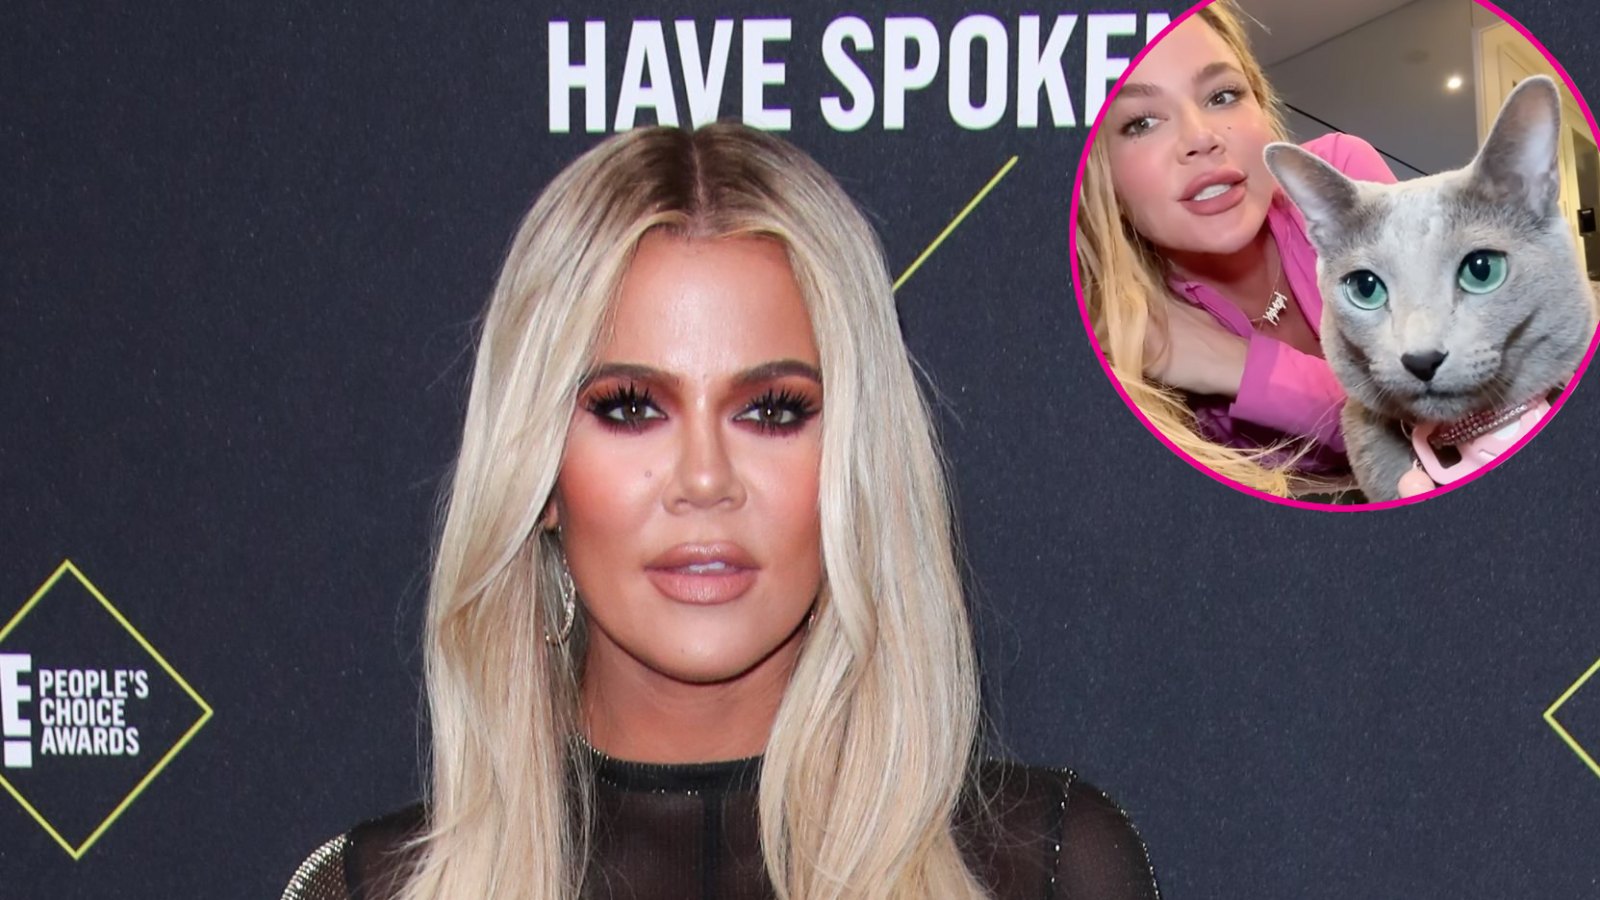 Khloe Kardashian Claps Back at Fan Comment Stating She Will Give Away Her Cat